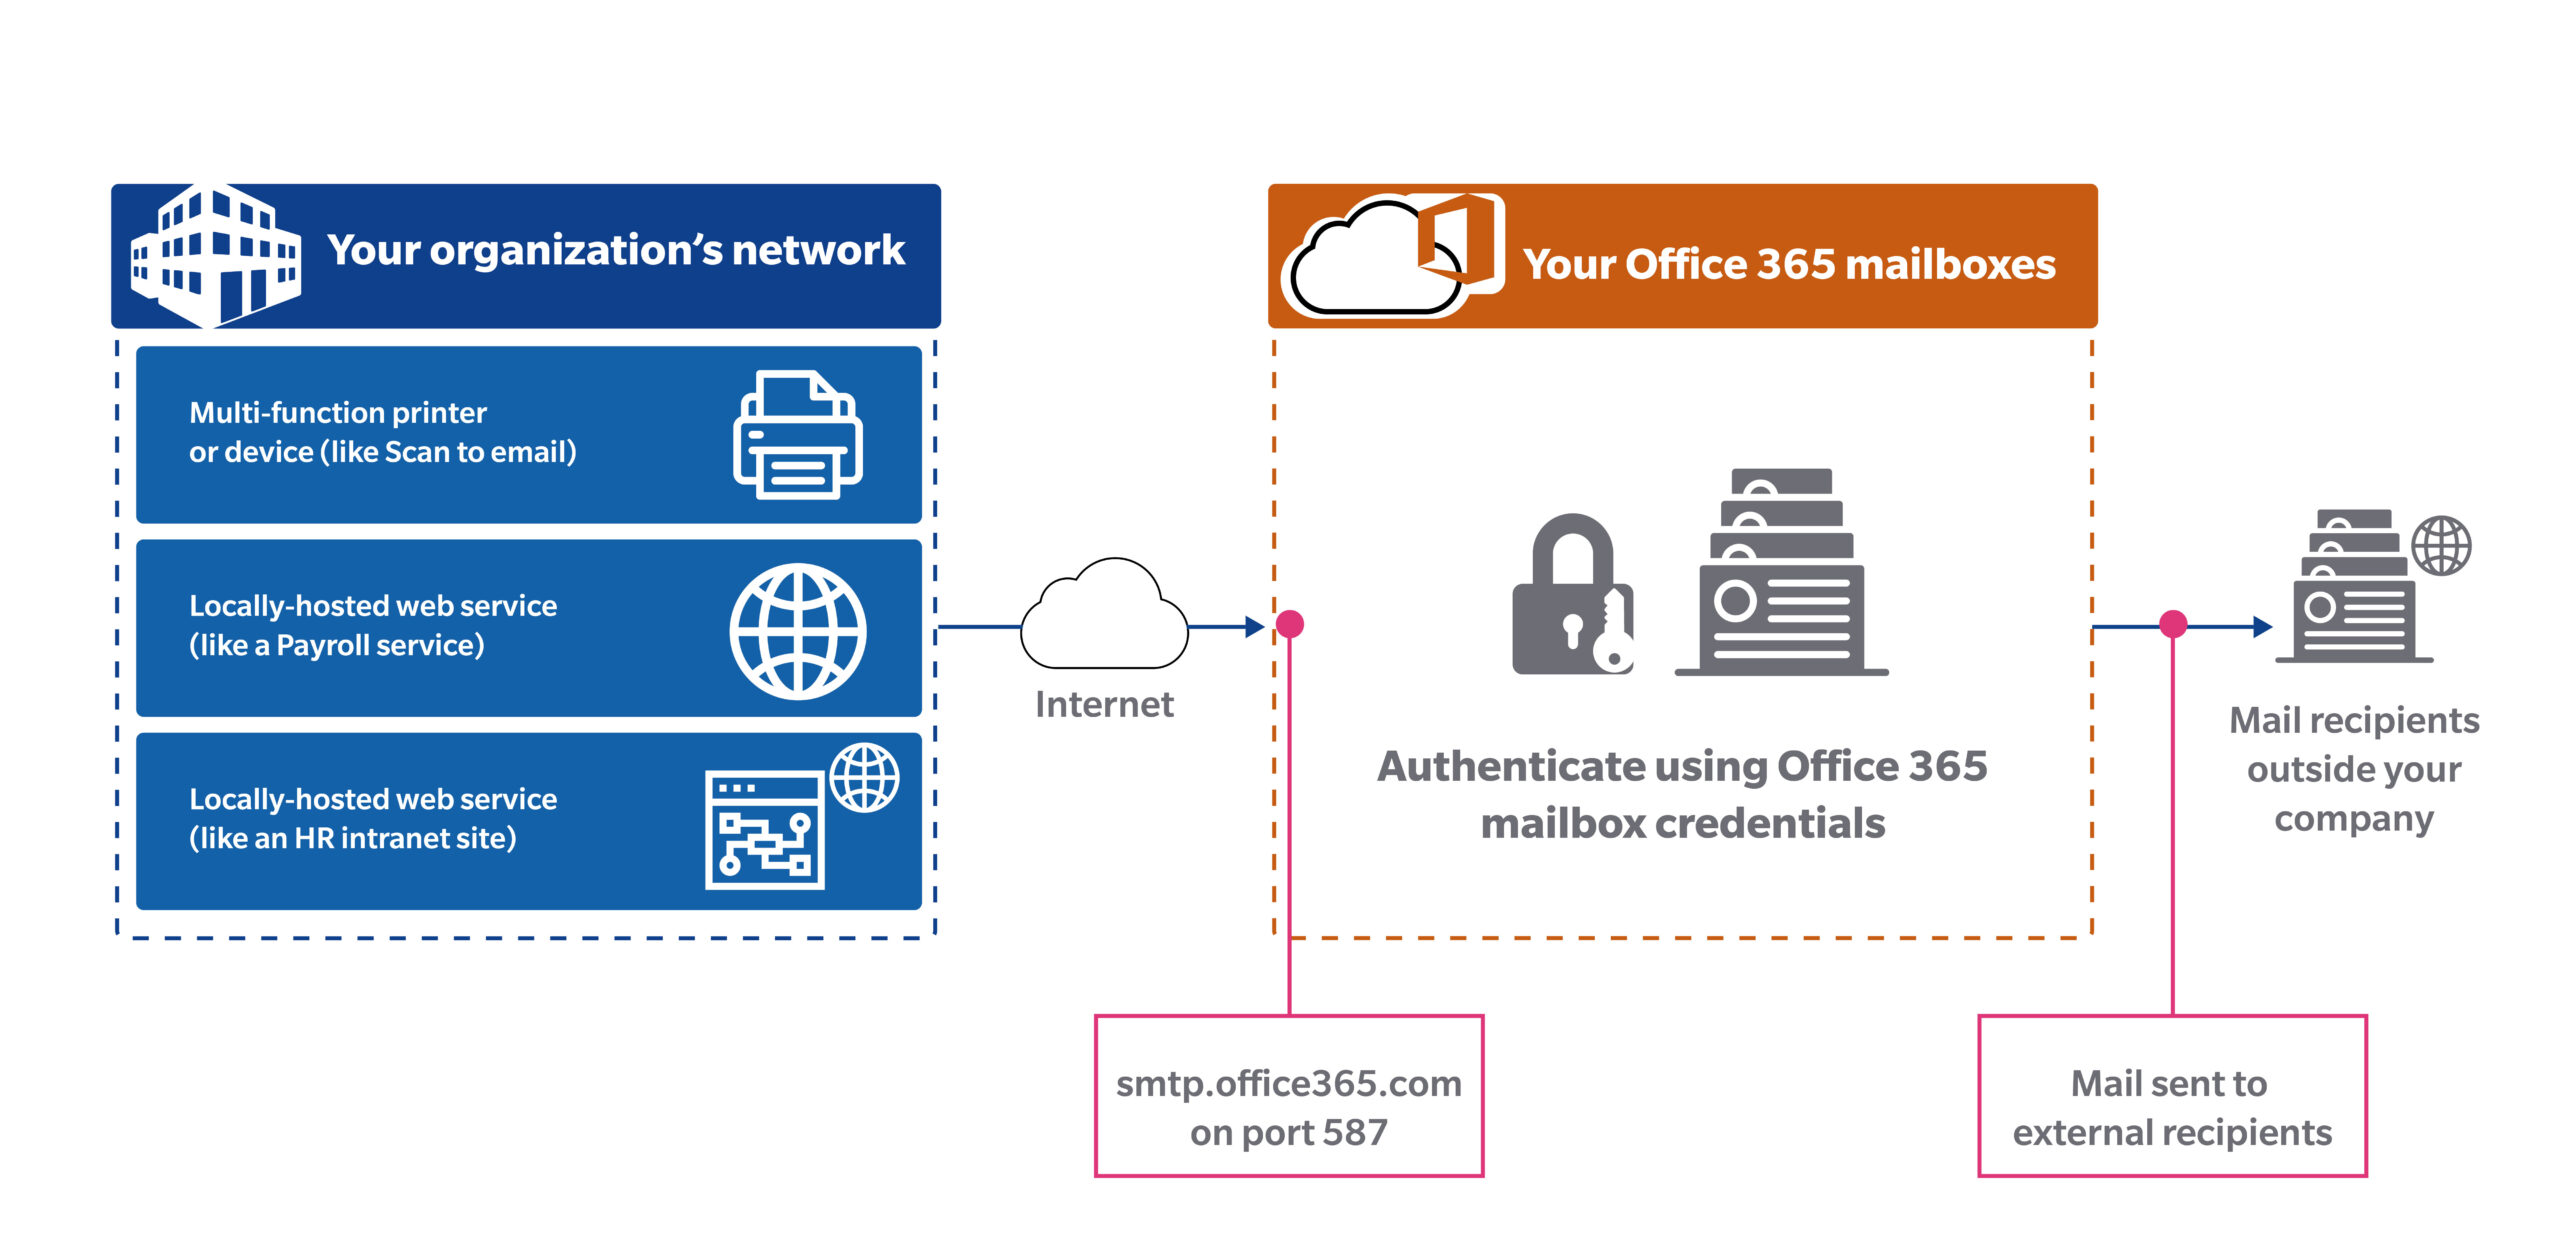 Your Organization's network to Your office 365 mailboxes